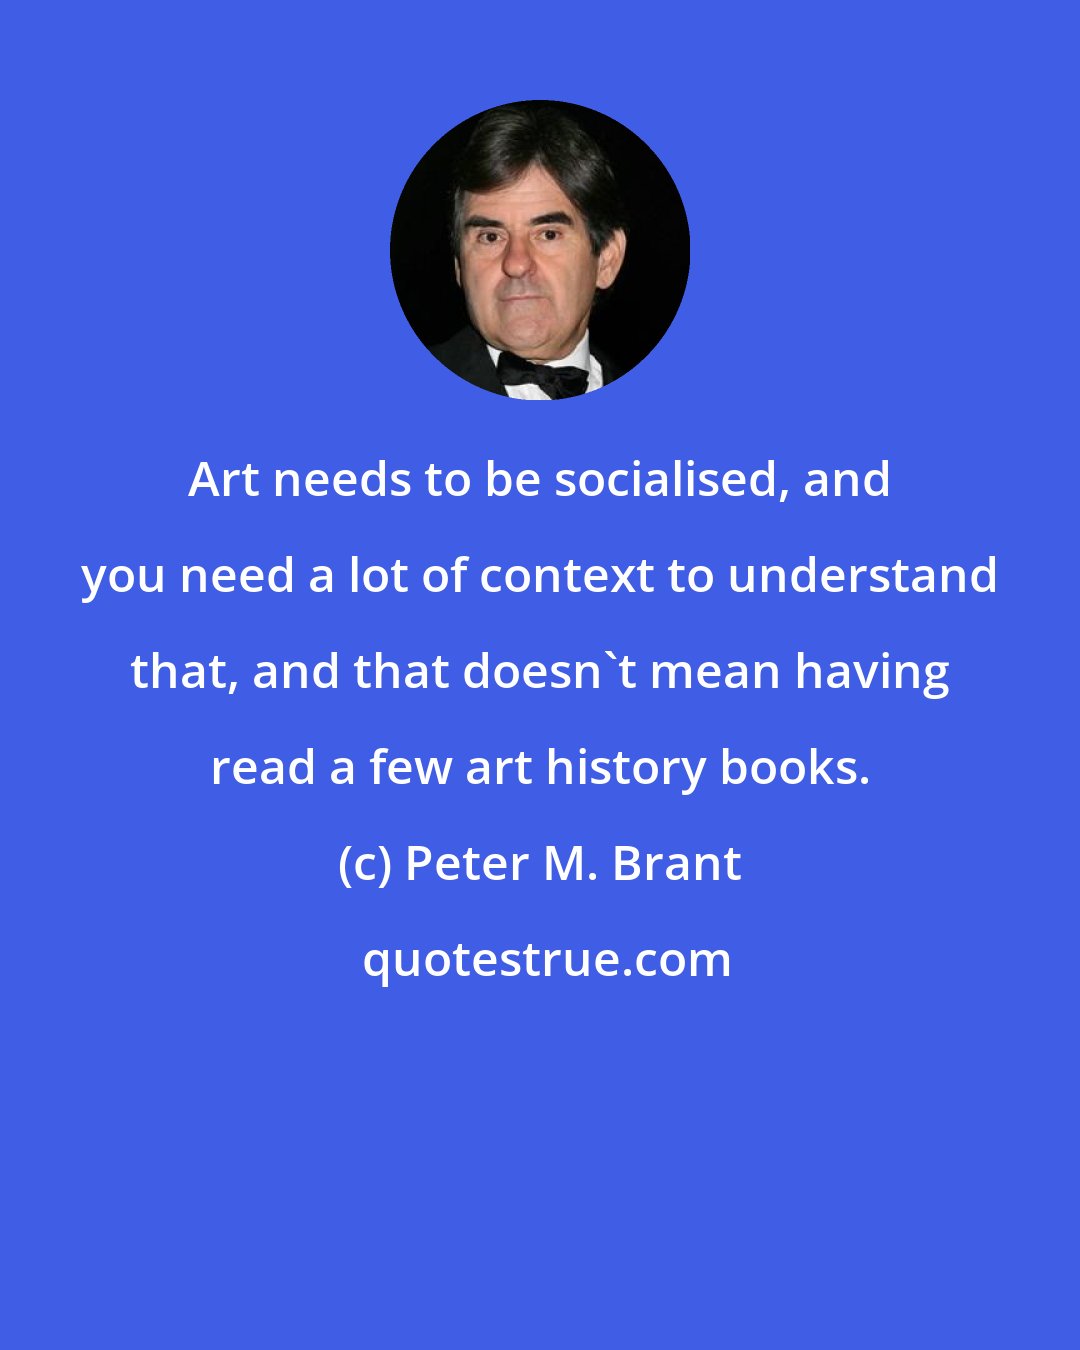 Peter M. Brant: Art needs to be socialised, and you need a lot of context to understand that, and that doesn't mean having read a few art history books.